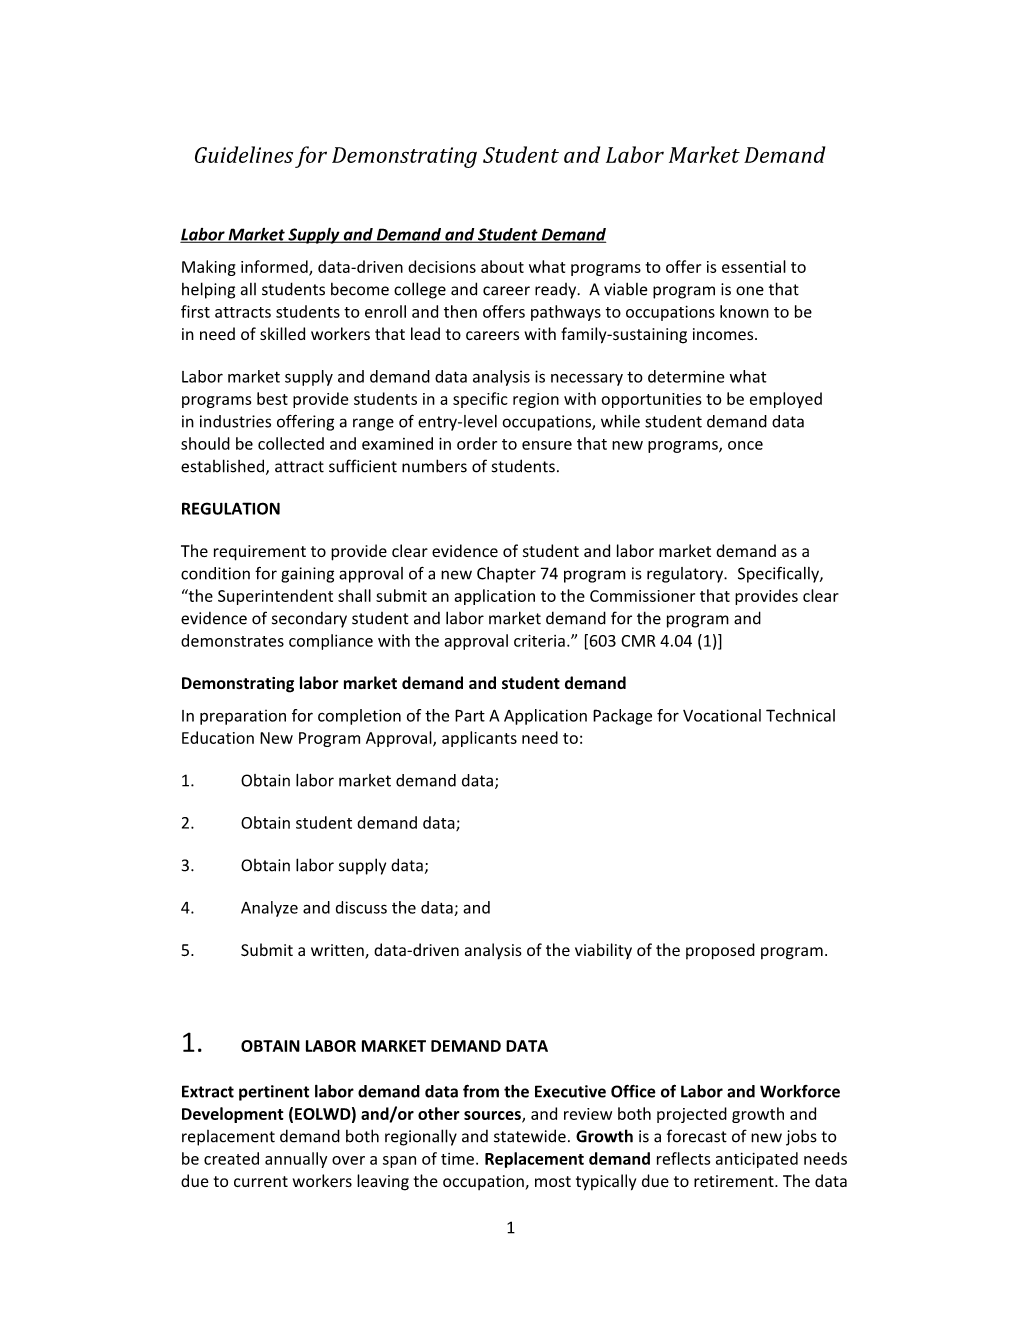 Guidelines For Demonstrating Student And Labor Market Demand For The Program